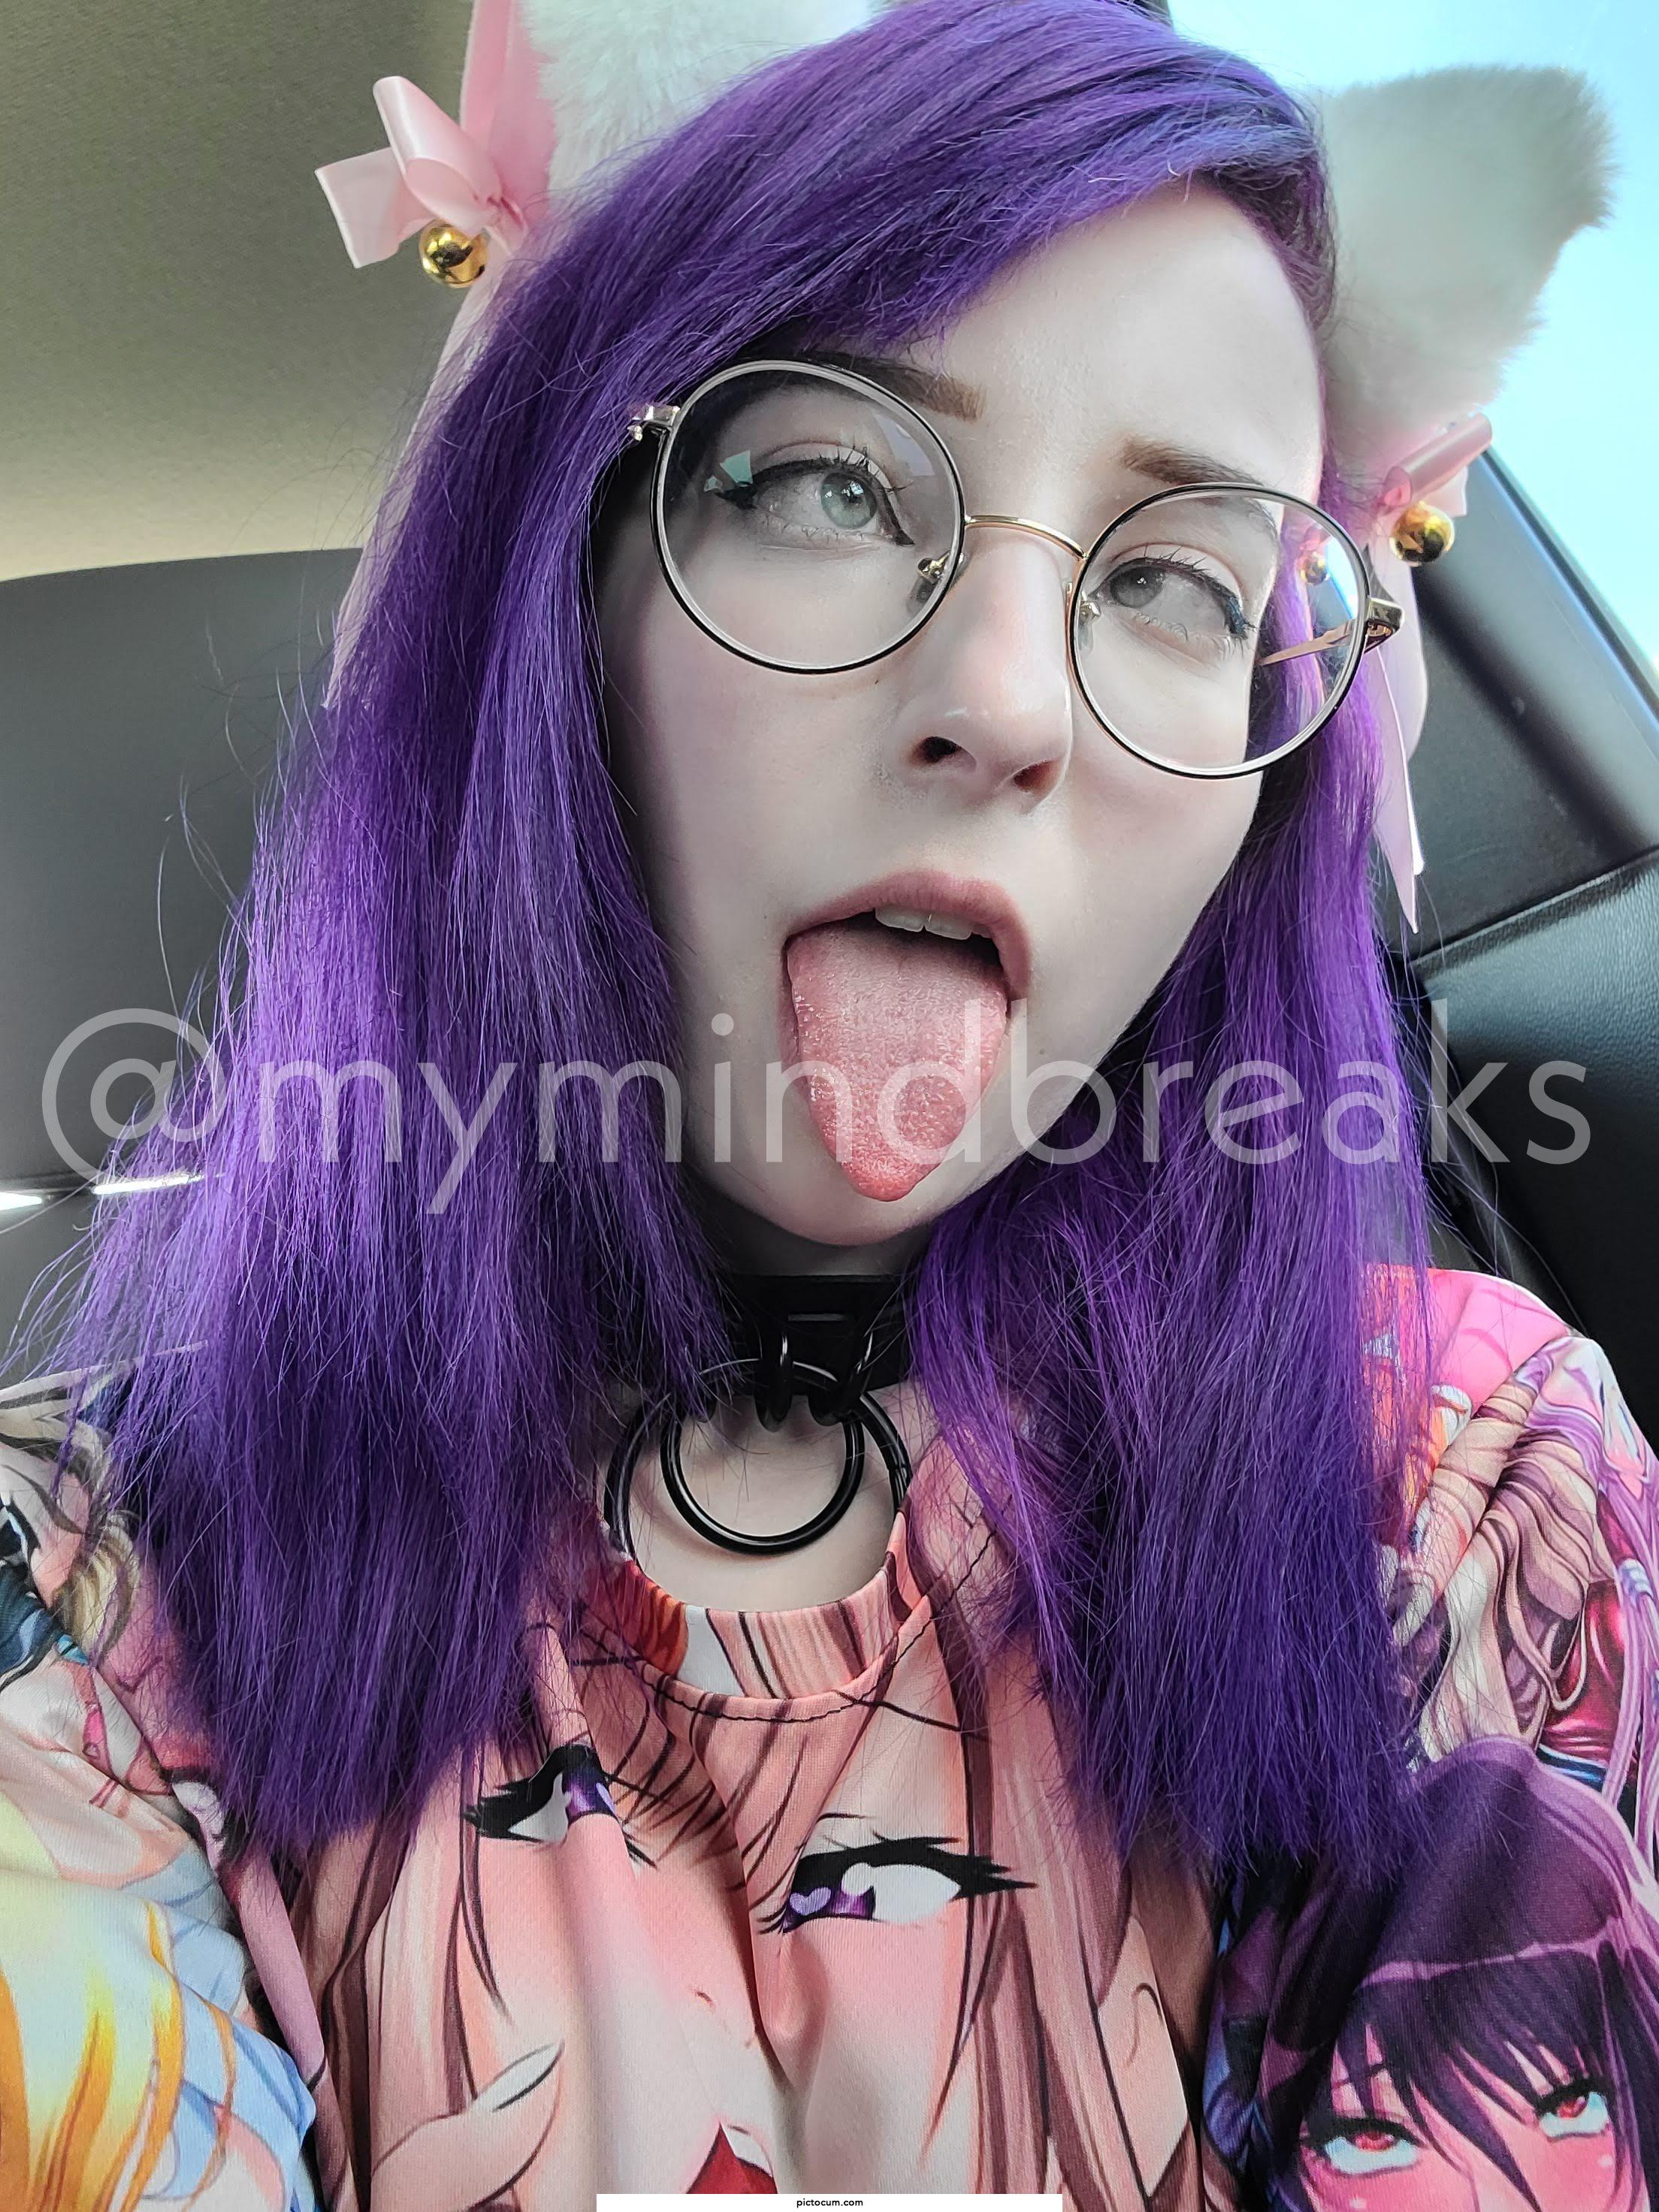 can I make this face while I'm sucking your dick?